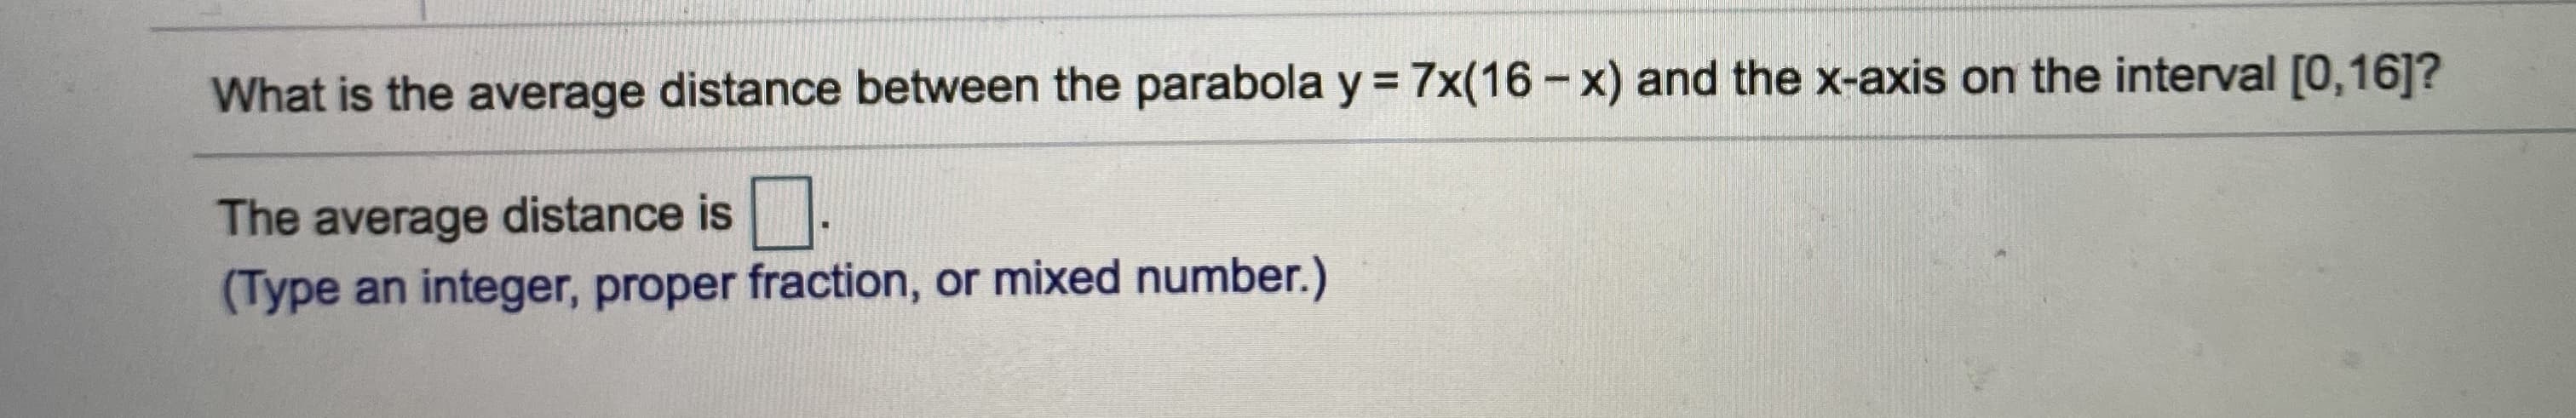 What is the average distance between the parabola y = 7x(16-x) and the x-axis on the interval [0,16]?
